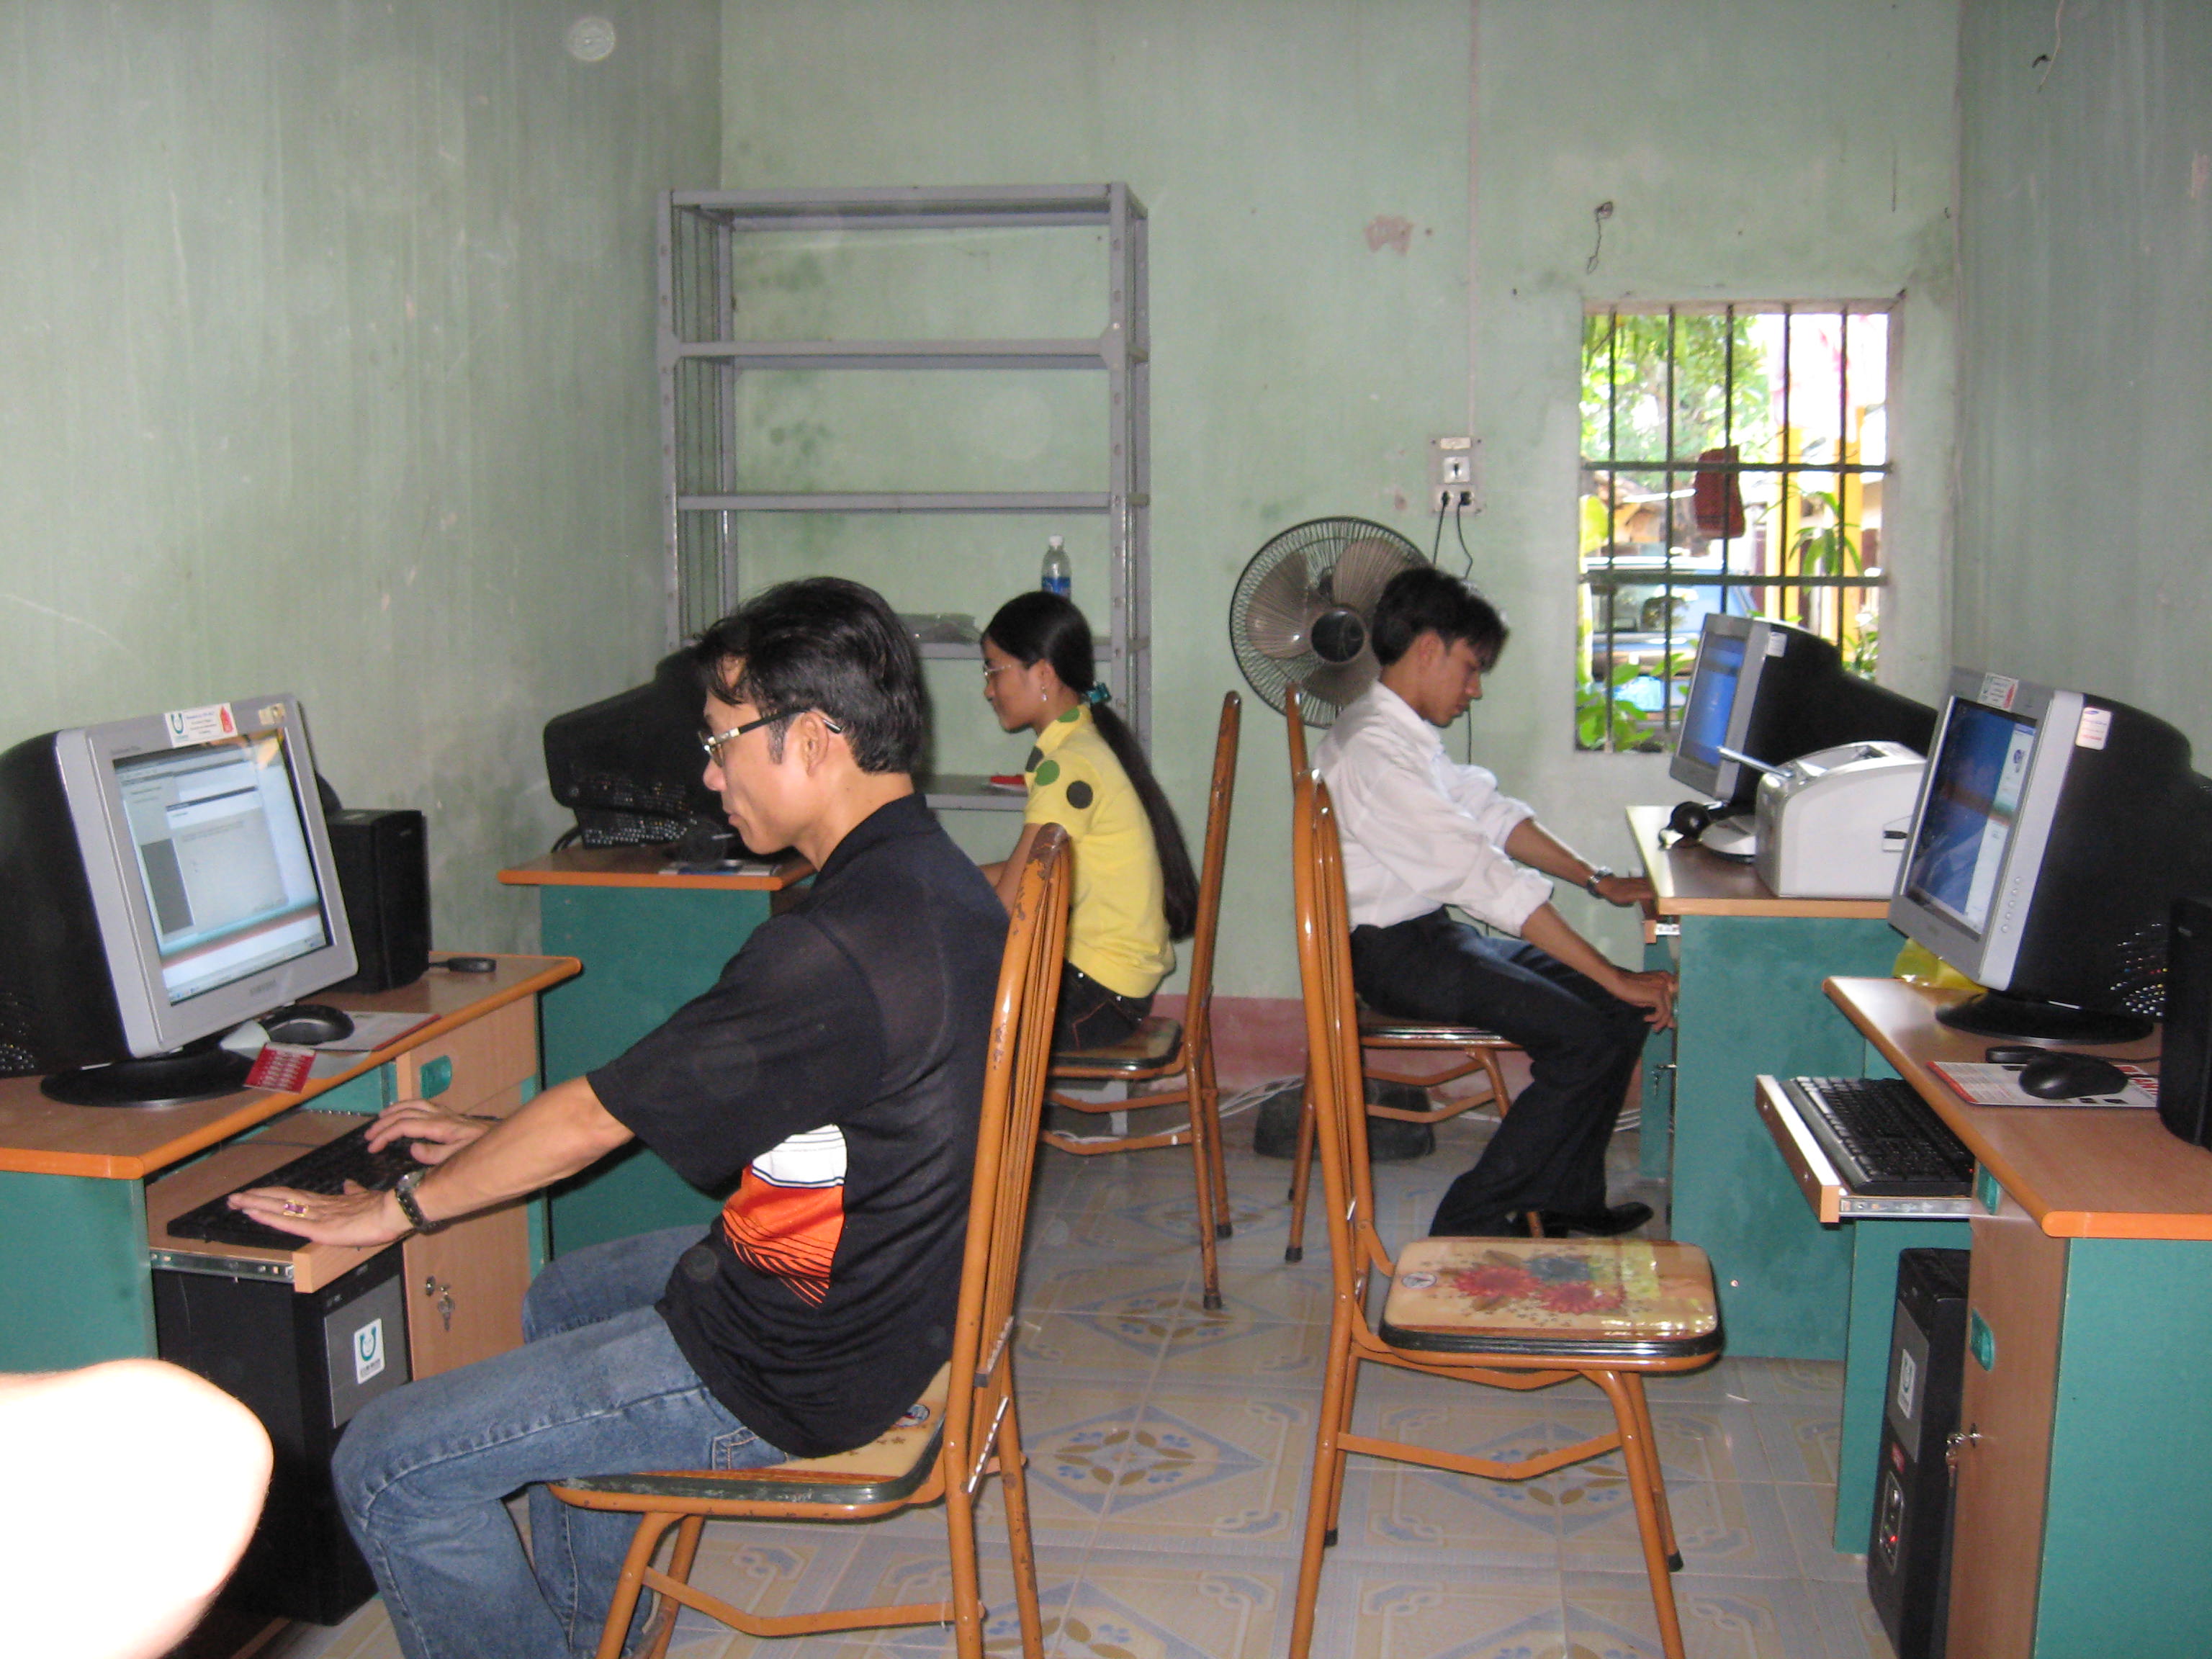 Computer room in Thanh Hoa